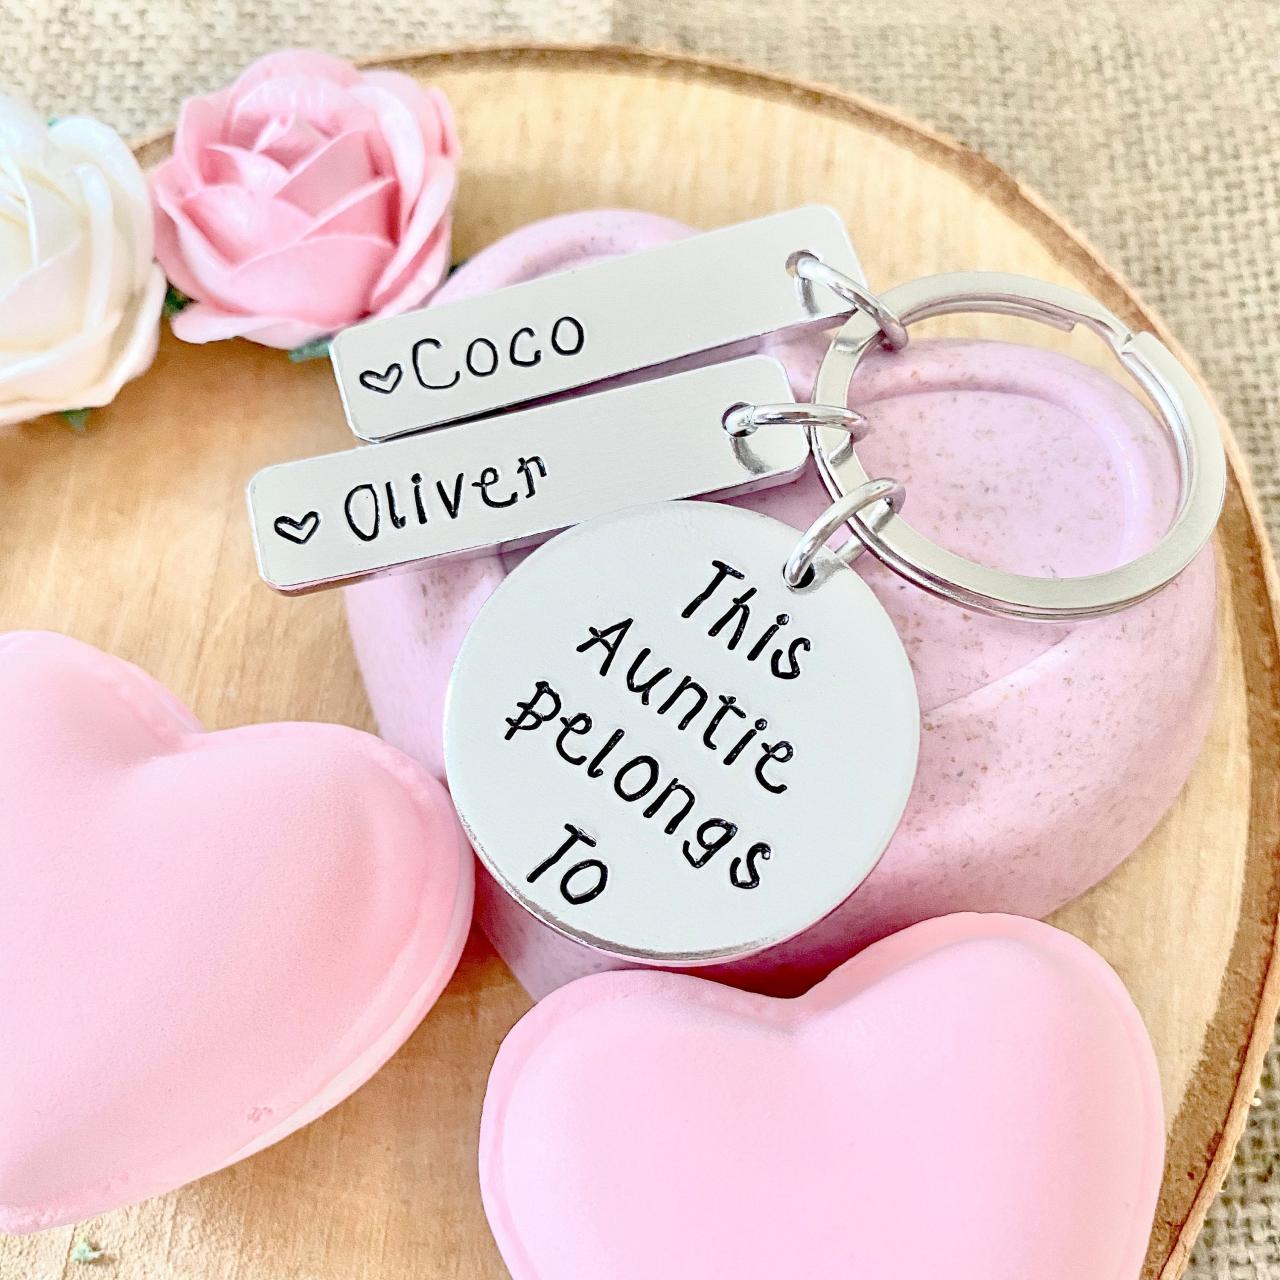 This Auntie Belongs To, Personalised Gift, Gift For Her, Gift For Auntie, From The Kids, Aunt Gift, Auntie Gift, Hand Stamped Gift, Aunt